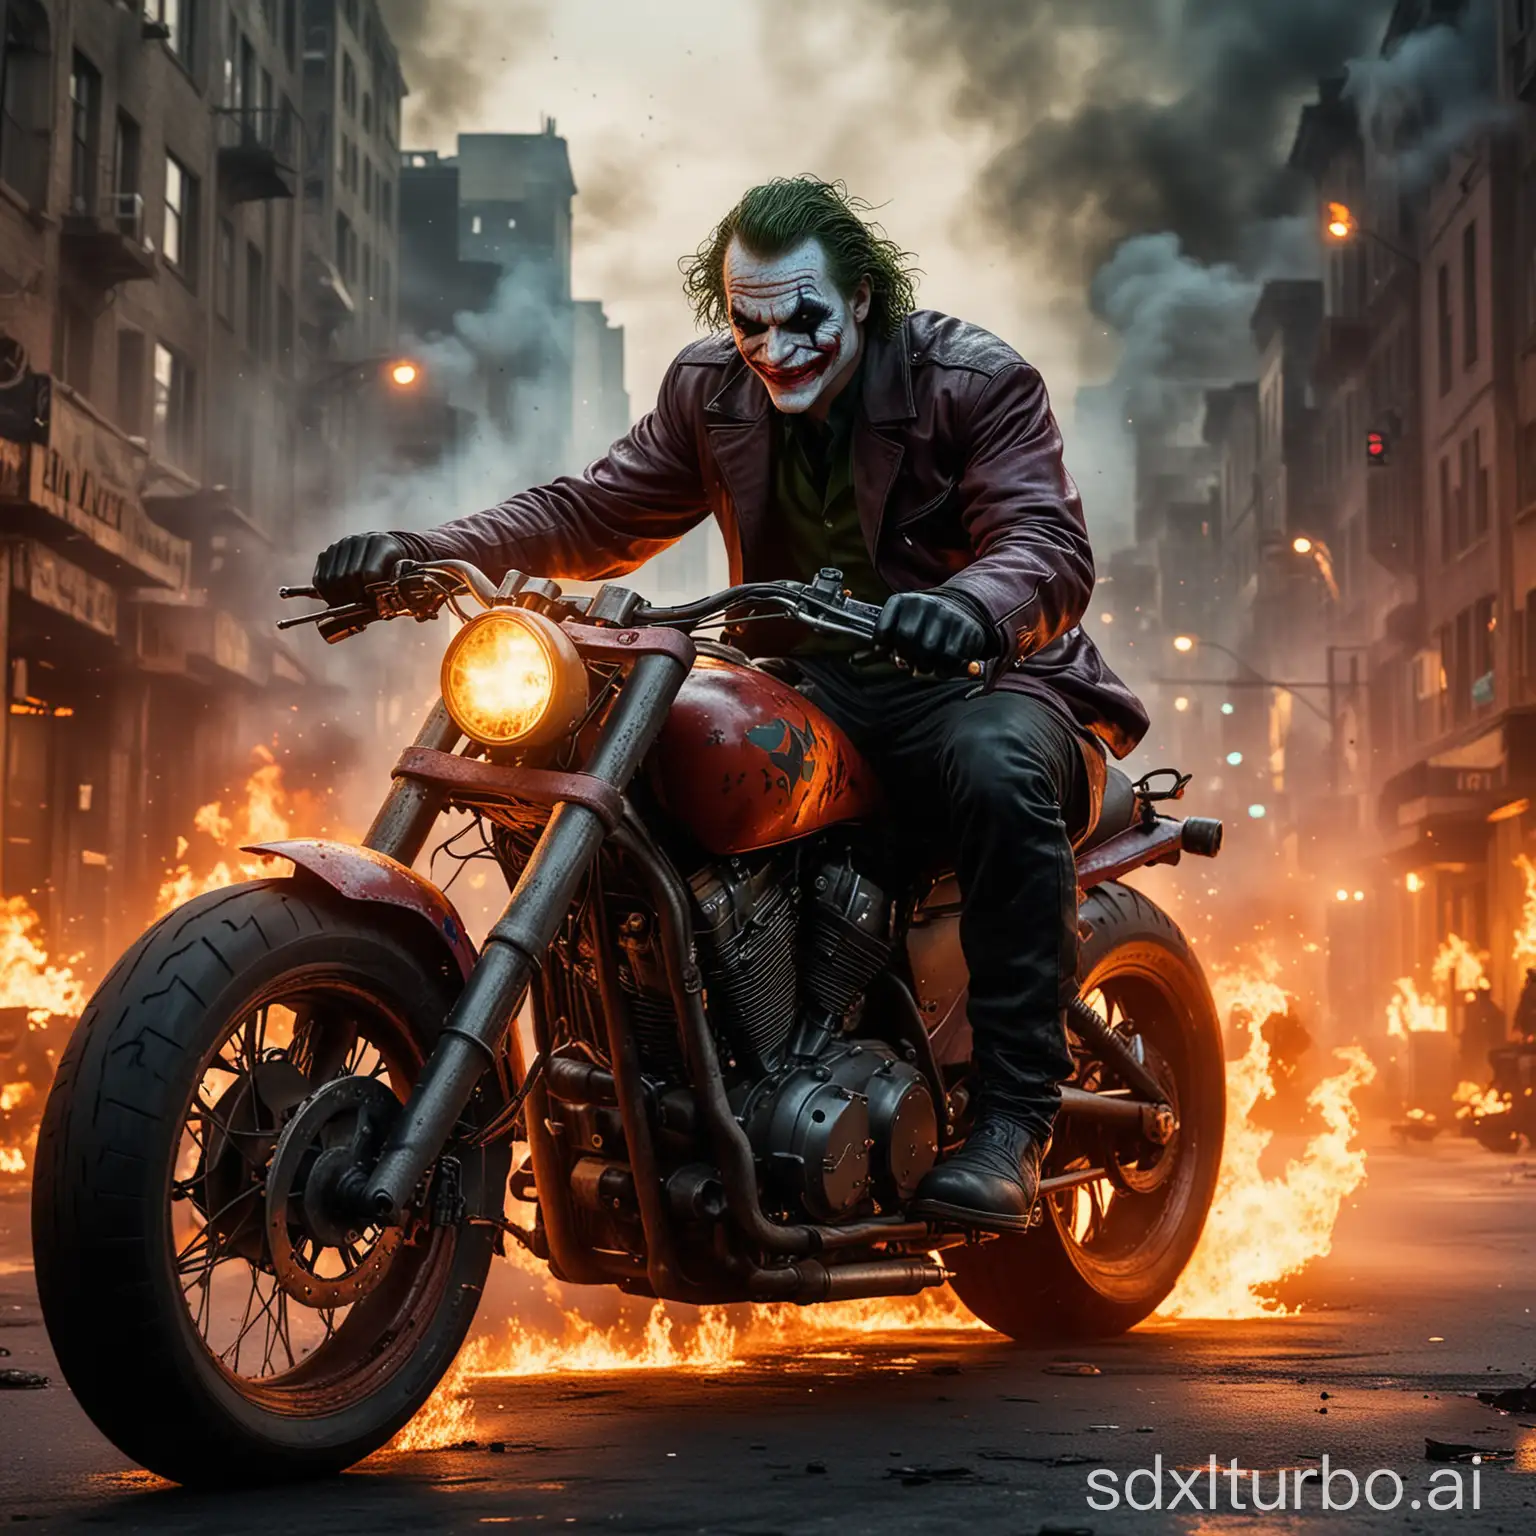 The-Joker-Riding-a-Red-Motorcycle-Through-a-Burning-City